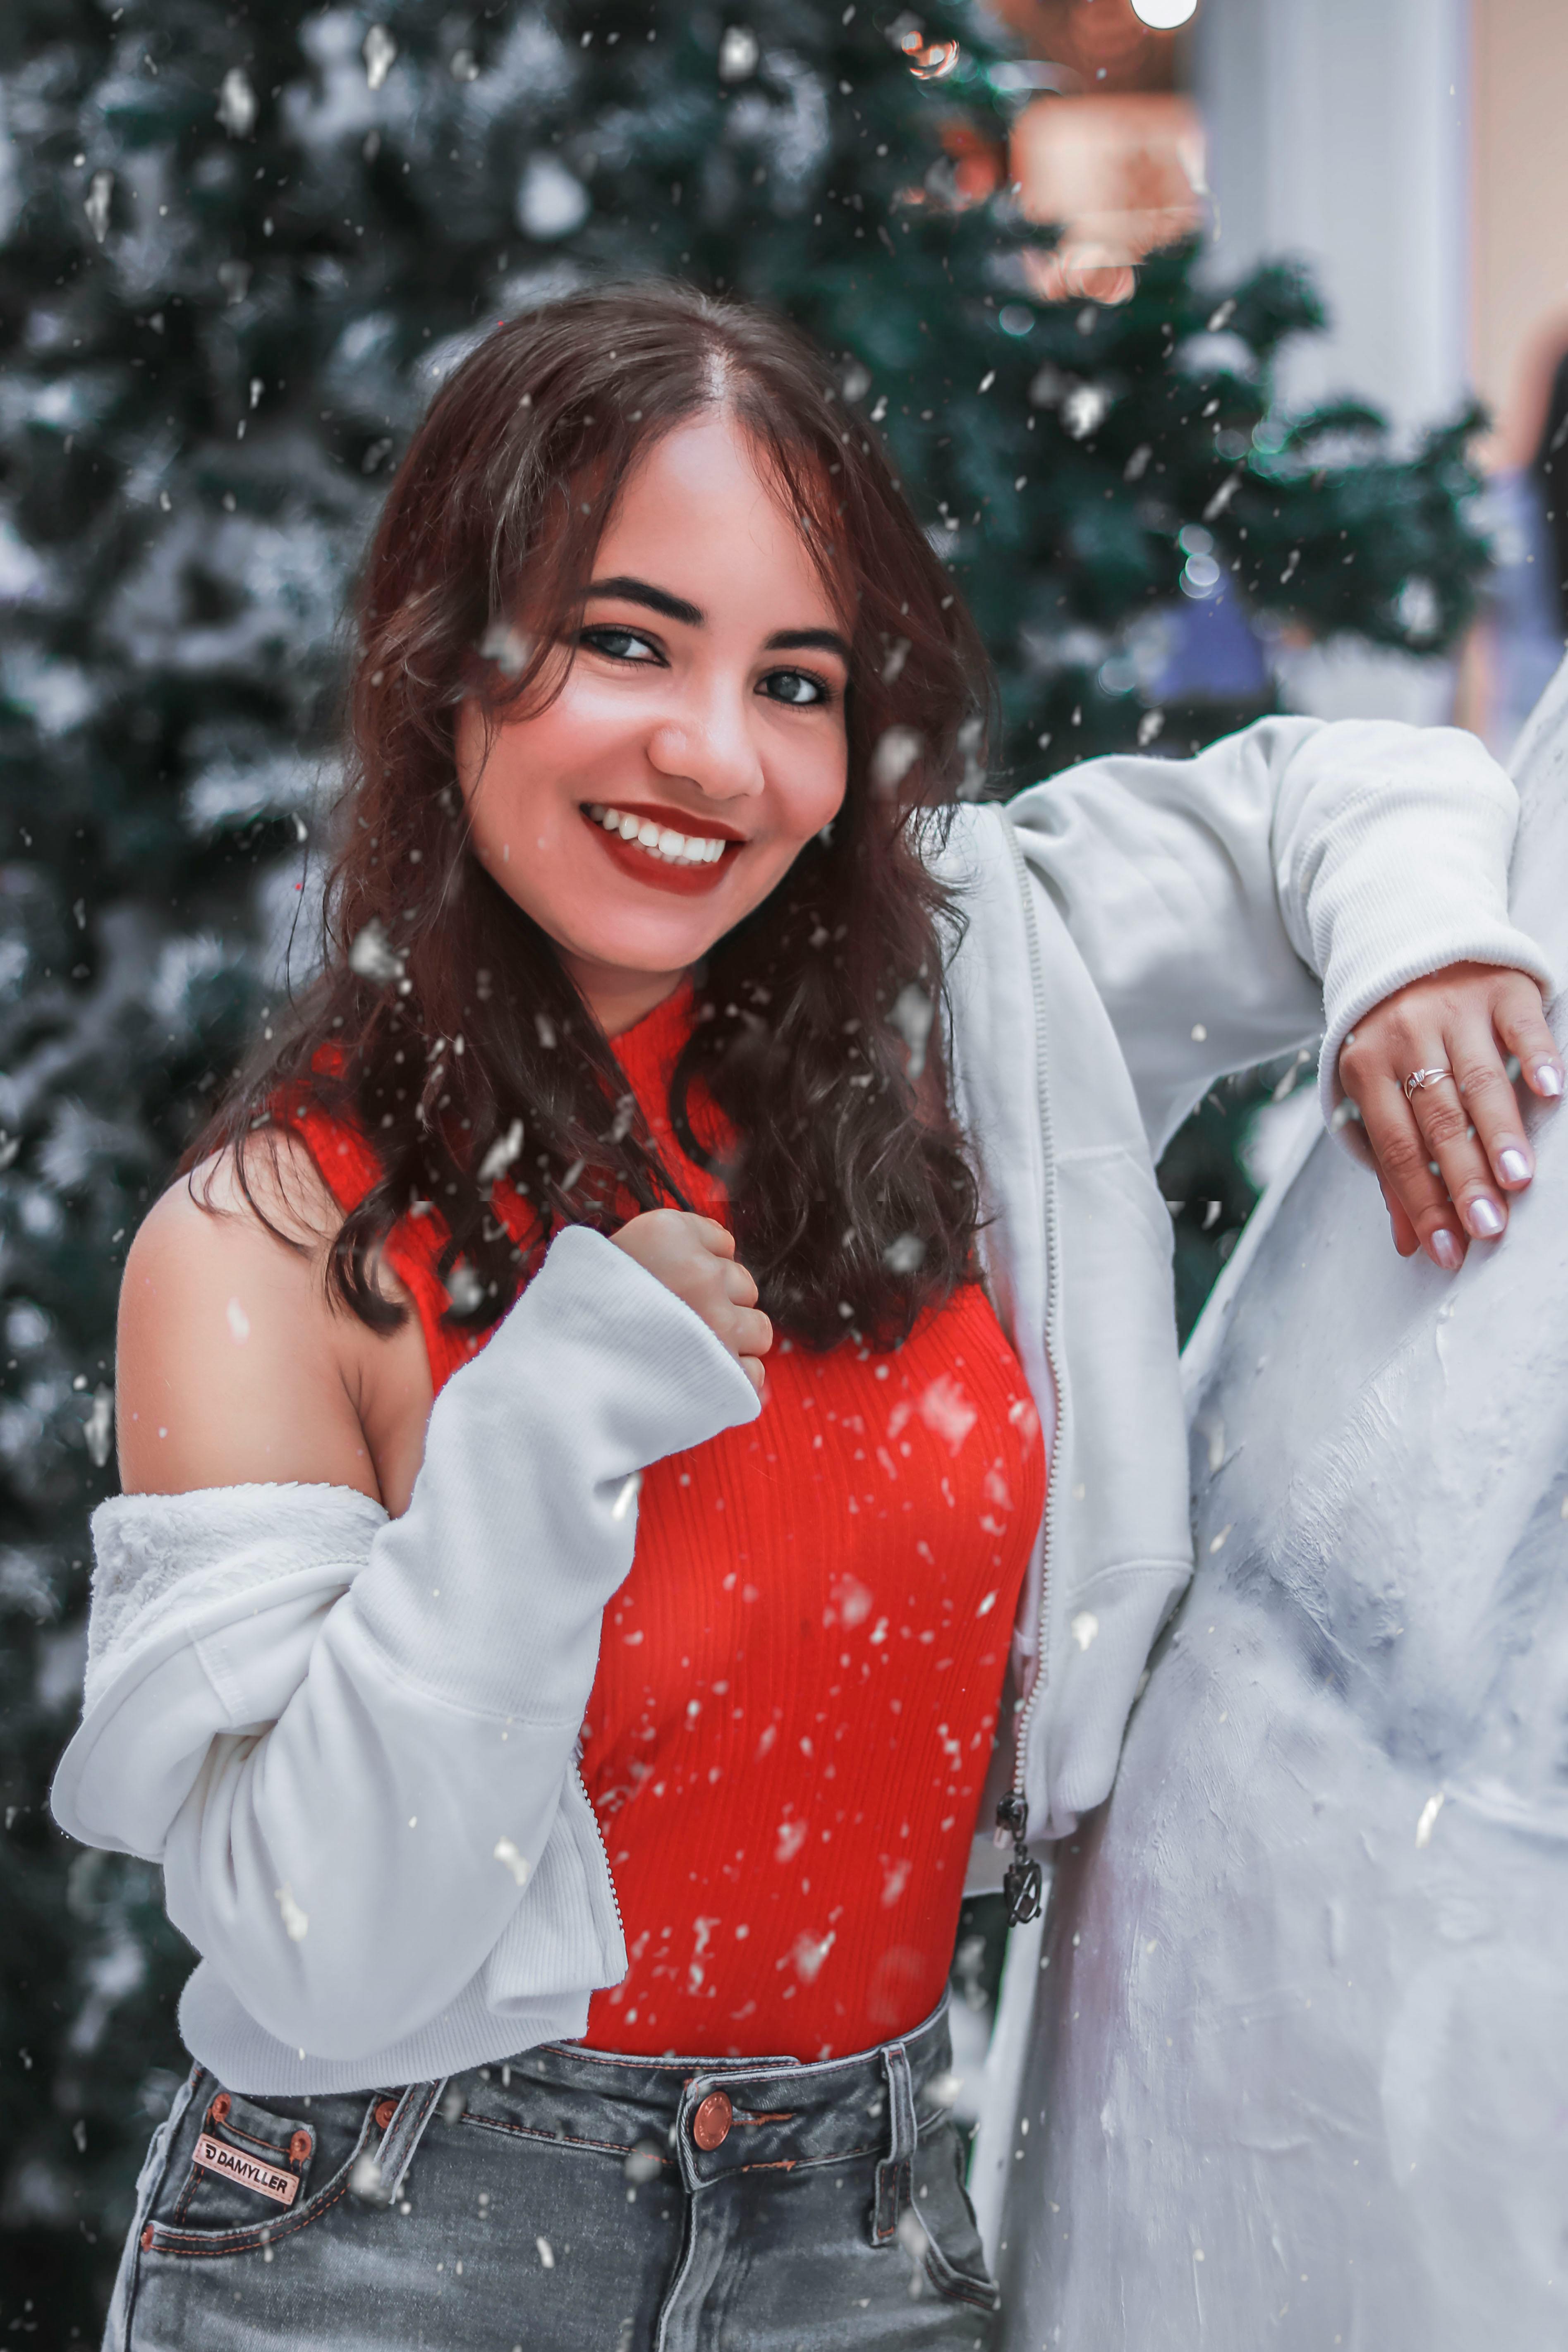 7 Ways to Pose with friends in the Snow – The Sassy Blonde | Snow  photoshoot, Friend poses, Winter photoshoot